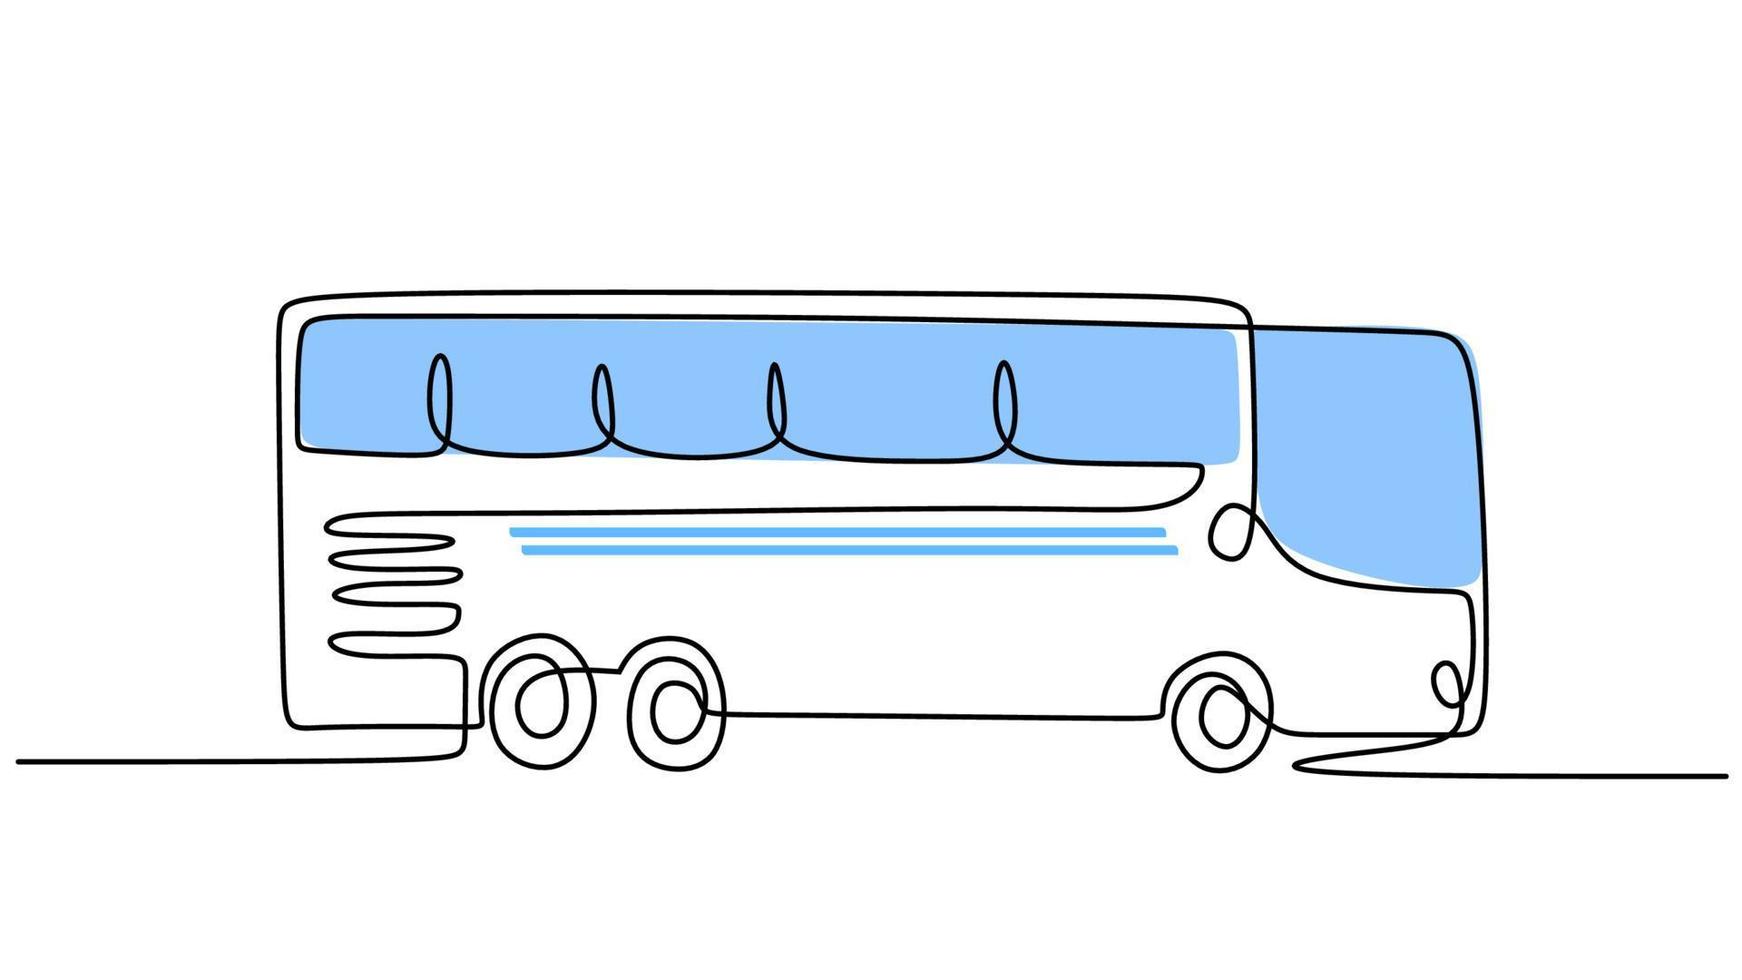 One line drawing of big bus isolated on white background. Continuous single line minimalism. vector